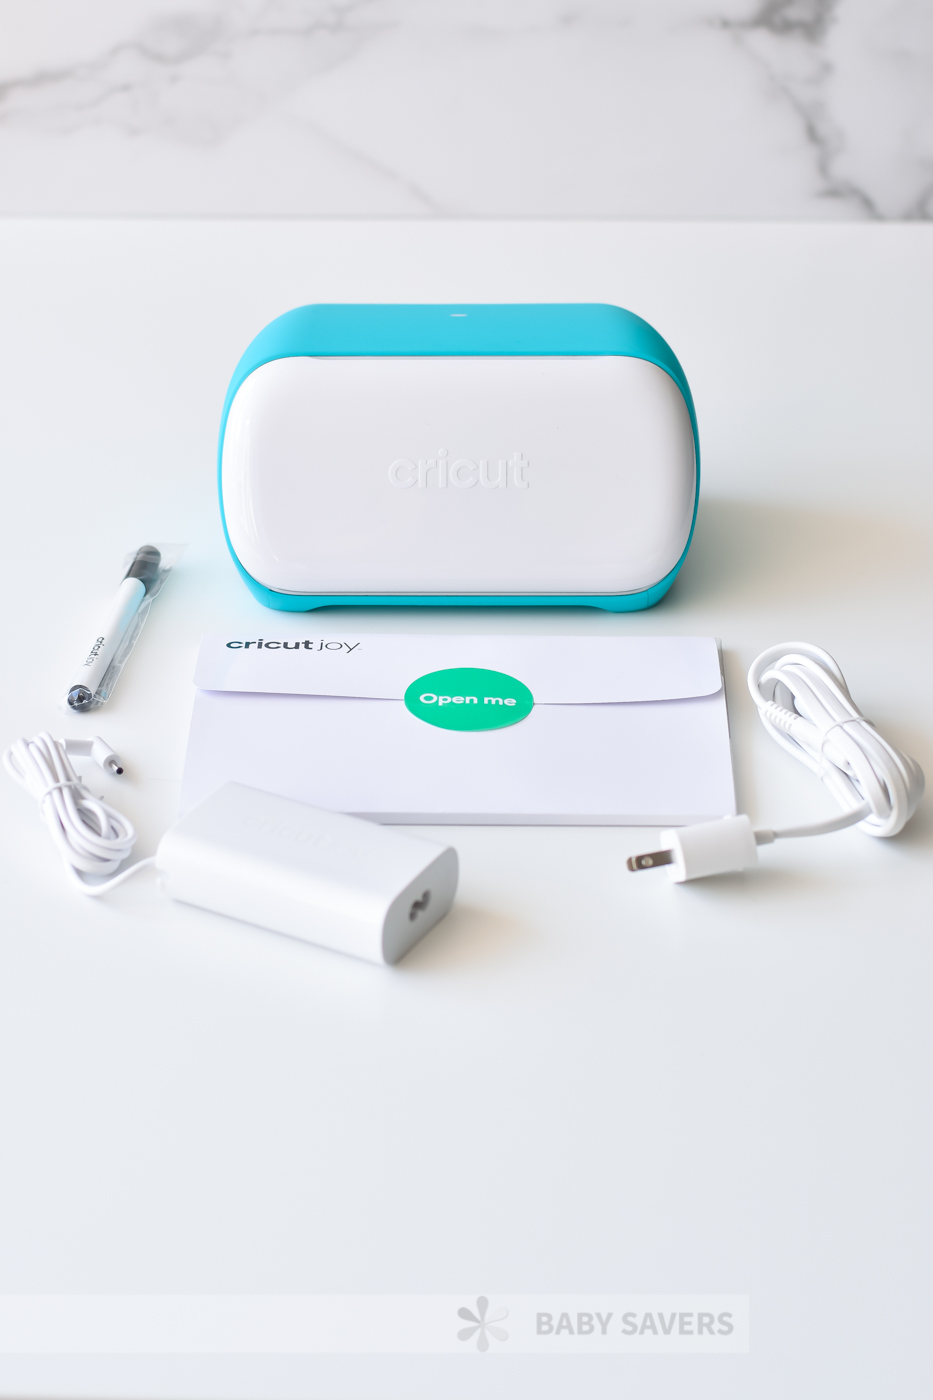 Cricut joy with pen, cords and everything that comes with it